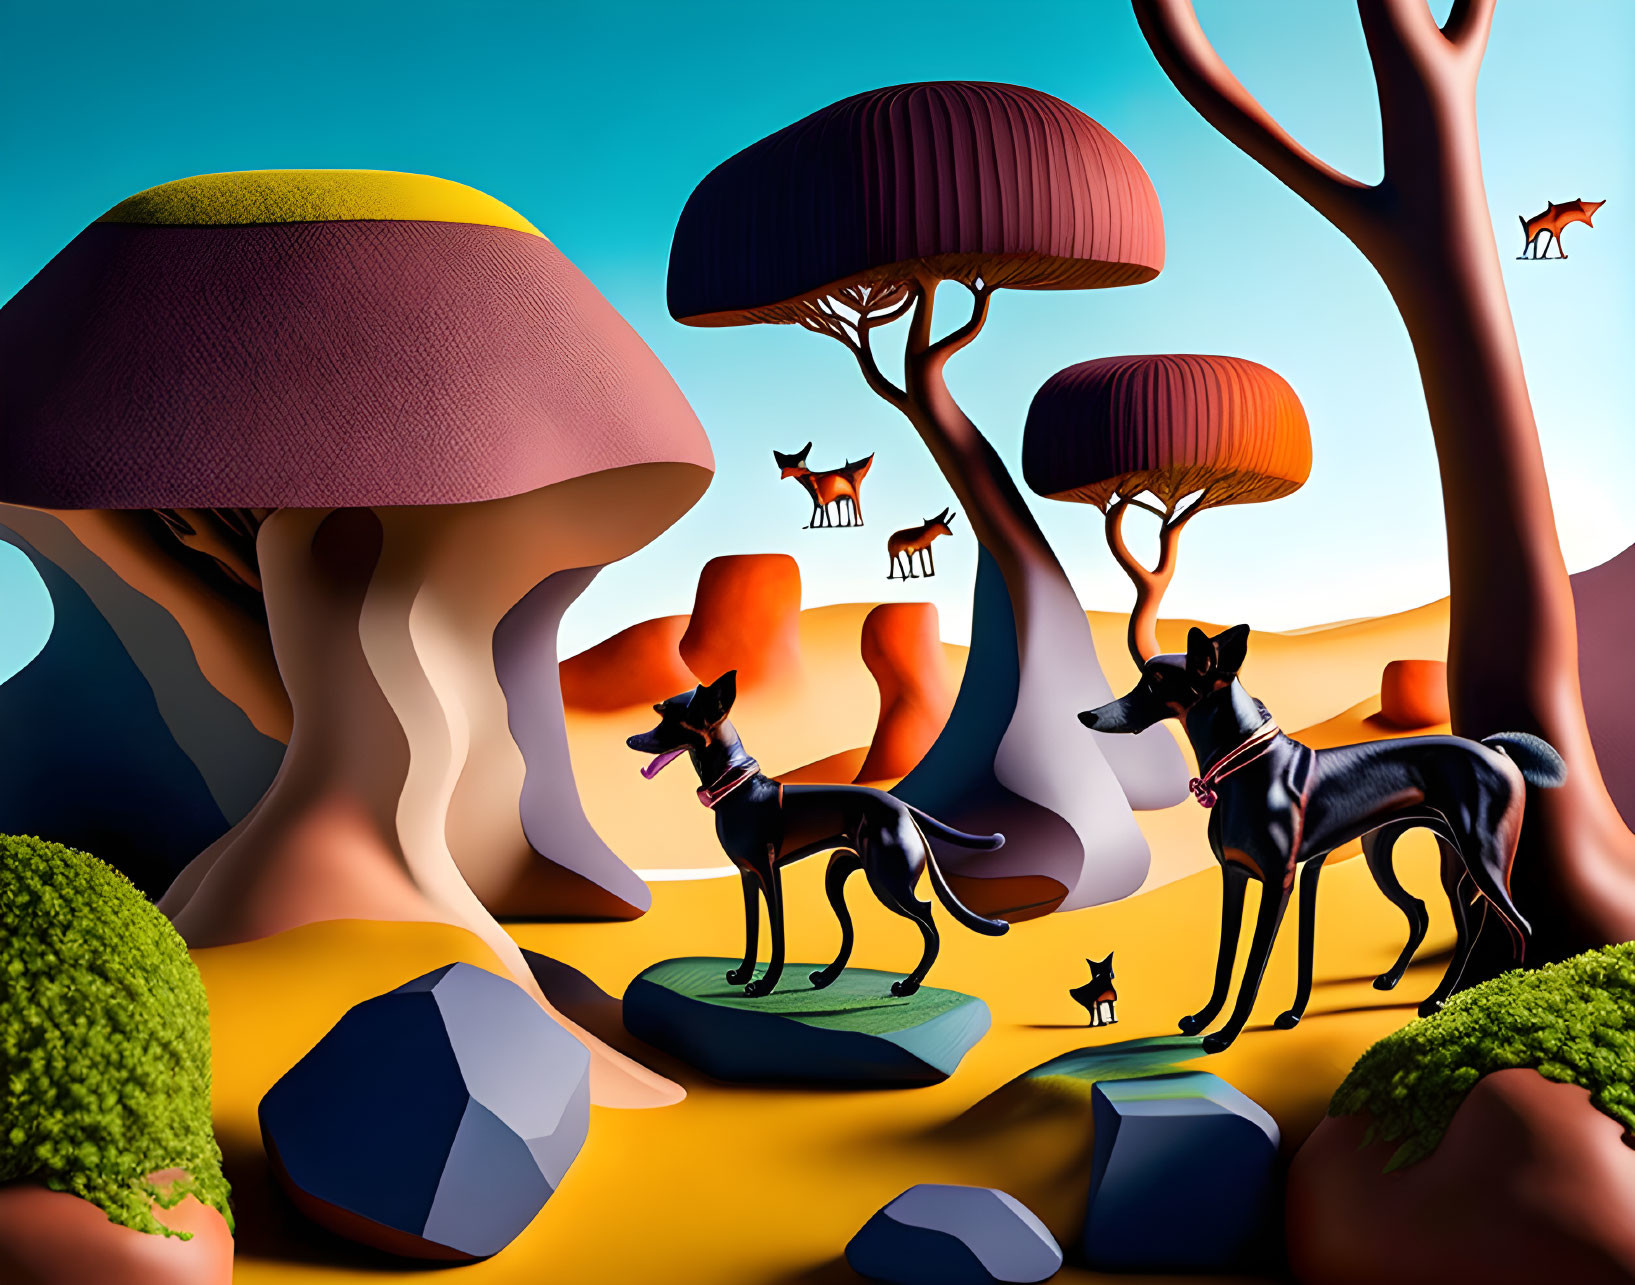 Whimsical landscape with oversized mushrooms, trees, dogs, and creatures